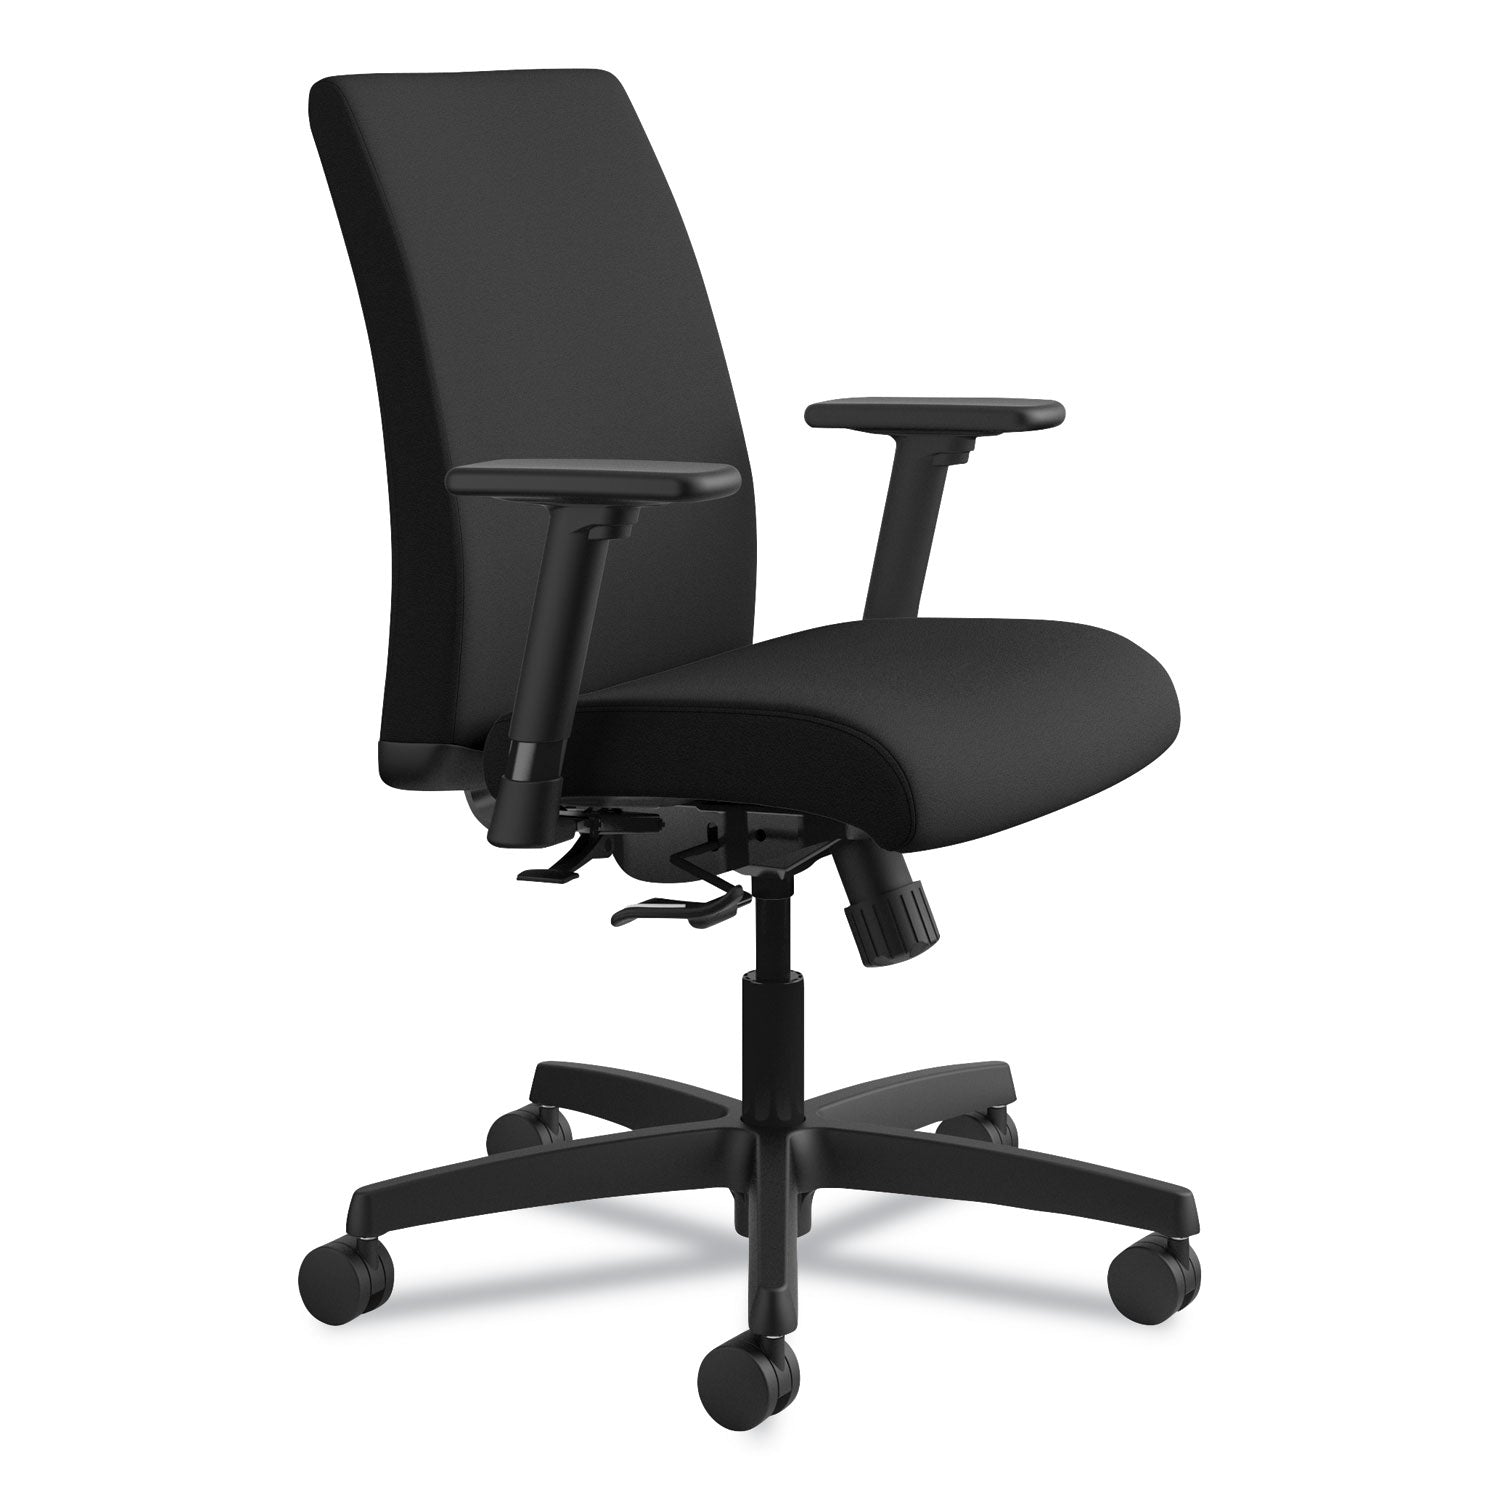 ignition-series-fabric-low-back-task-chair-supports-up-to-300-lb-17-to-215-seat-height-black_honit105cu10 - 2